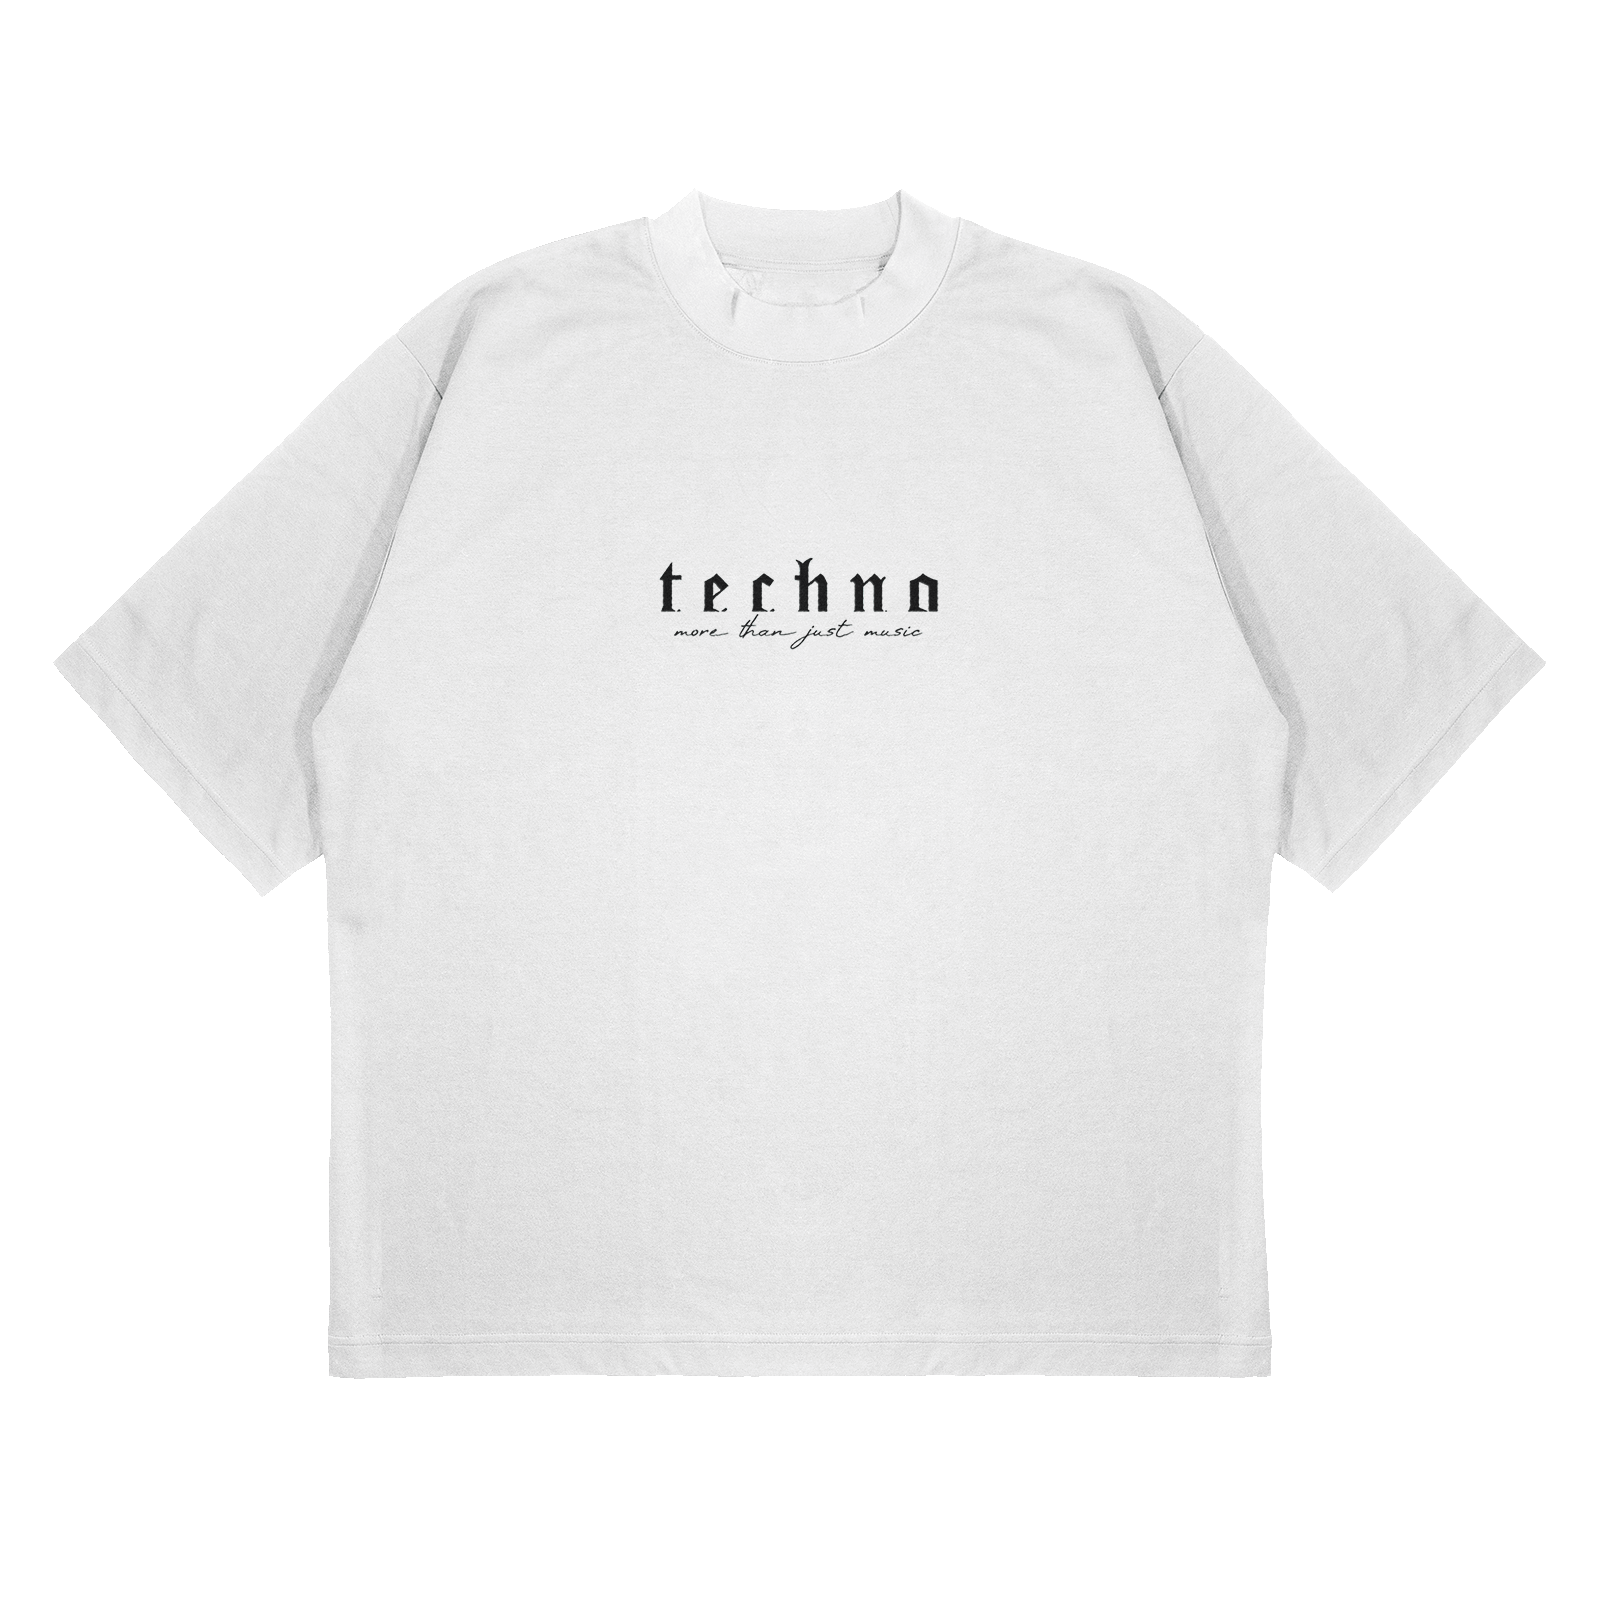 more than just techno - Oversized T-Shirt Unisex